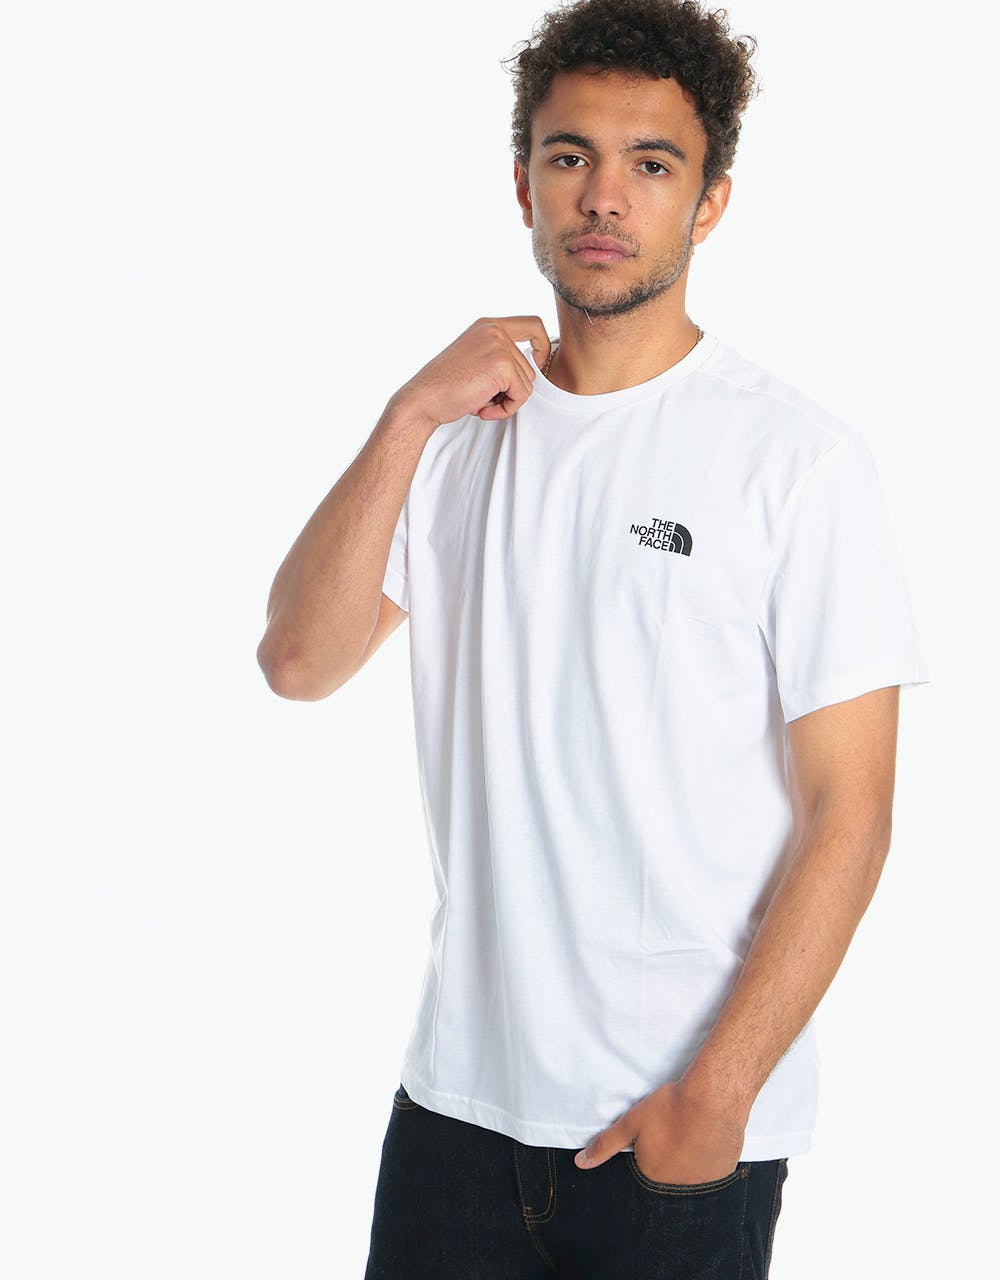 The North Face S/S Simple Dome T-Shirt - White